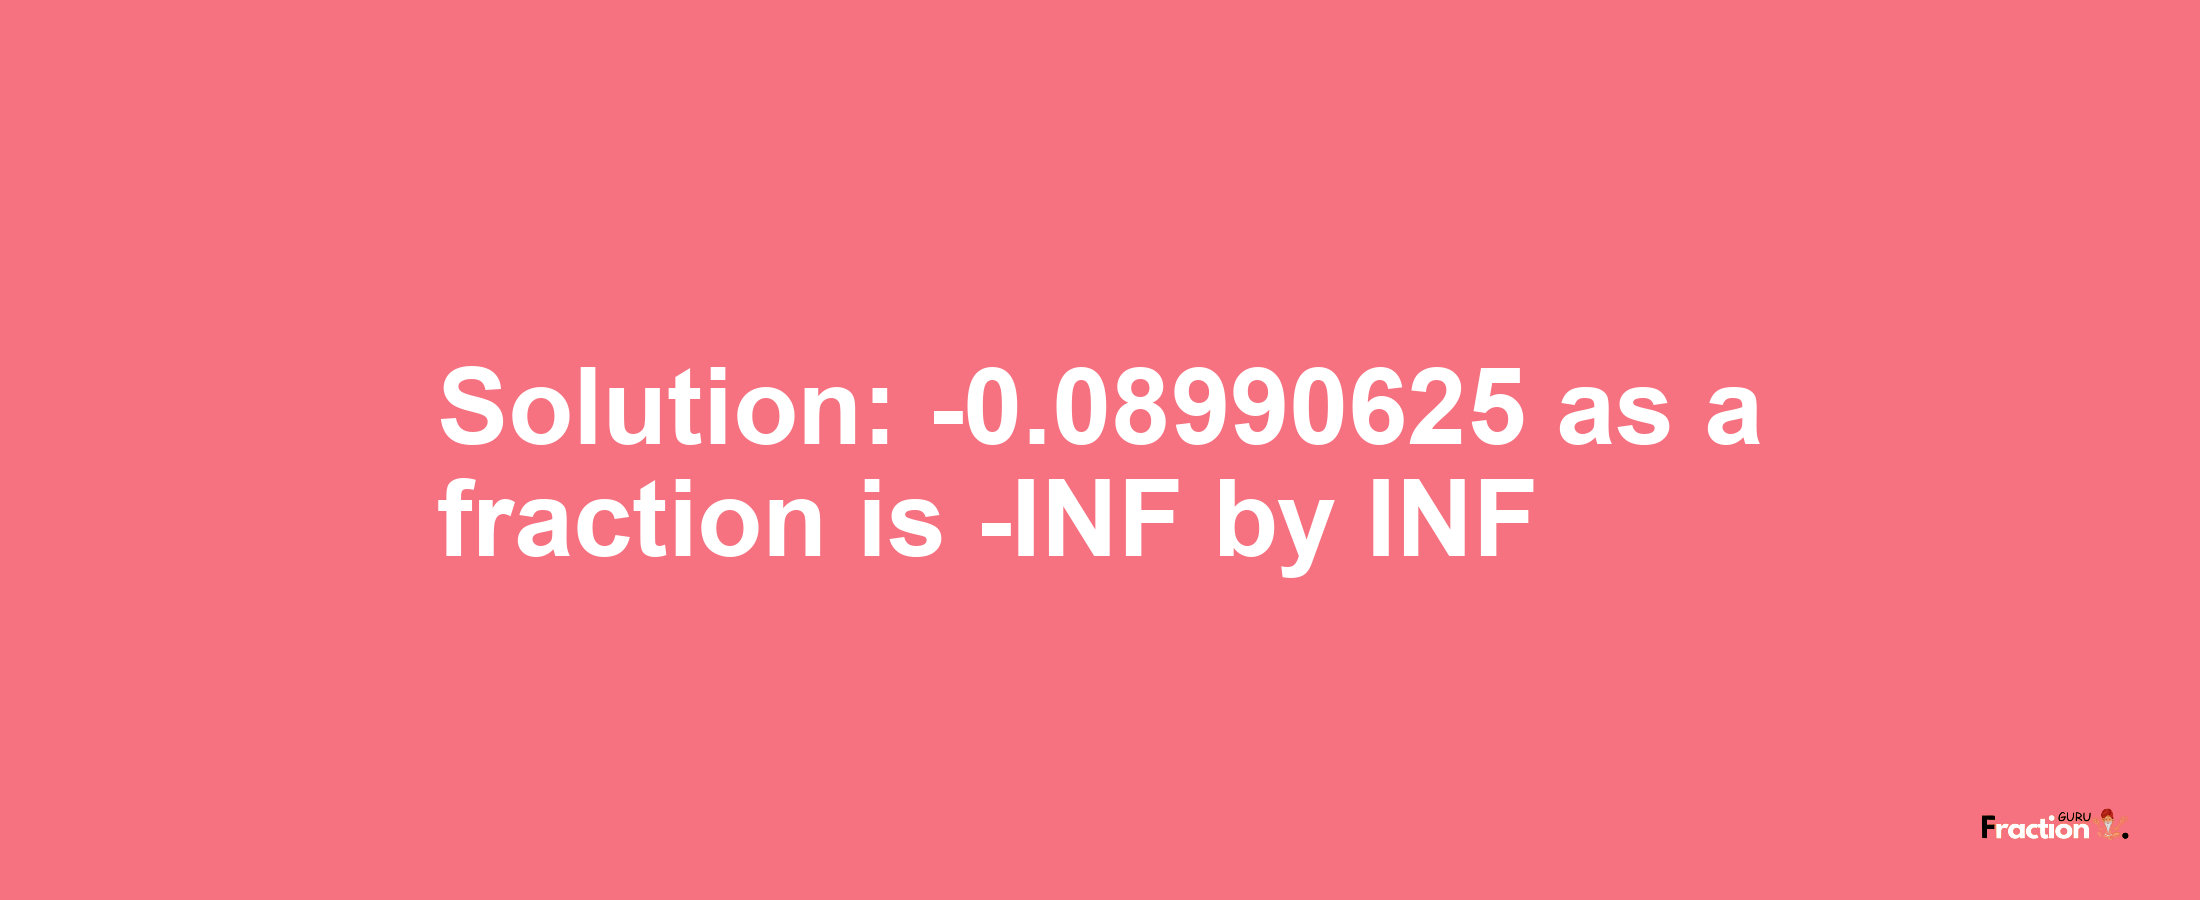 Solution:-0.08990625 as a fraction is -INF/INF